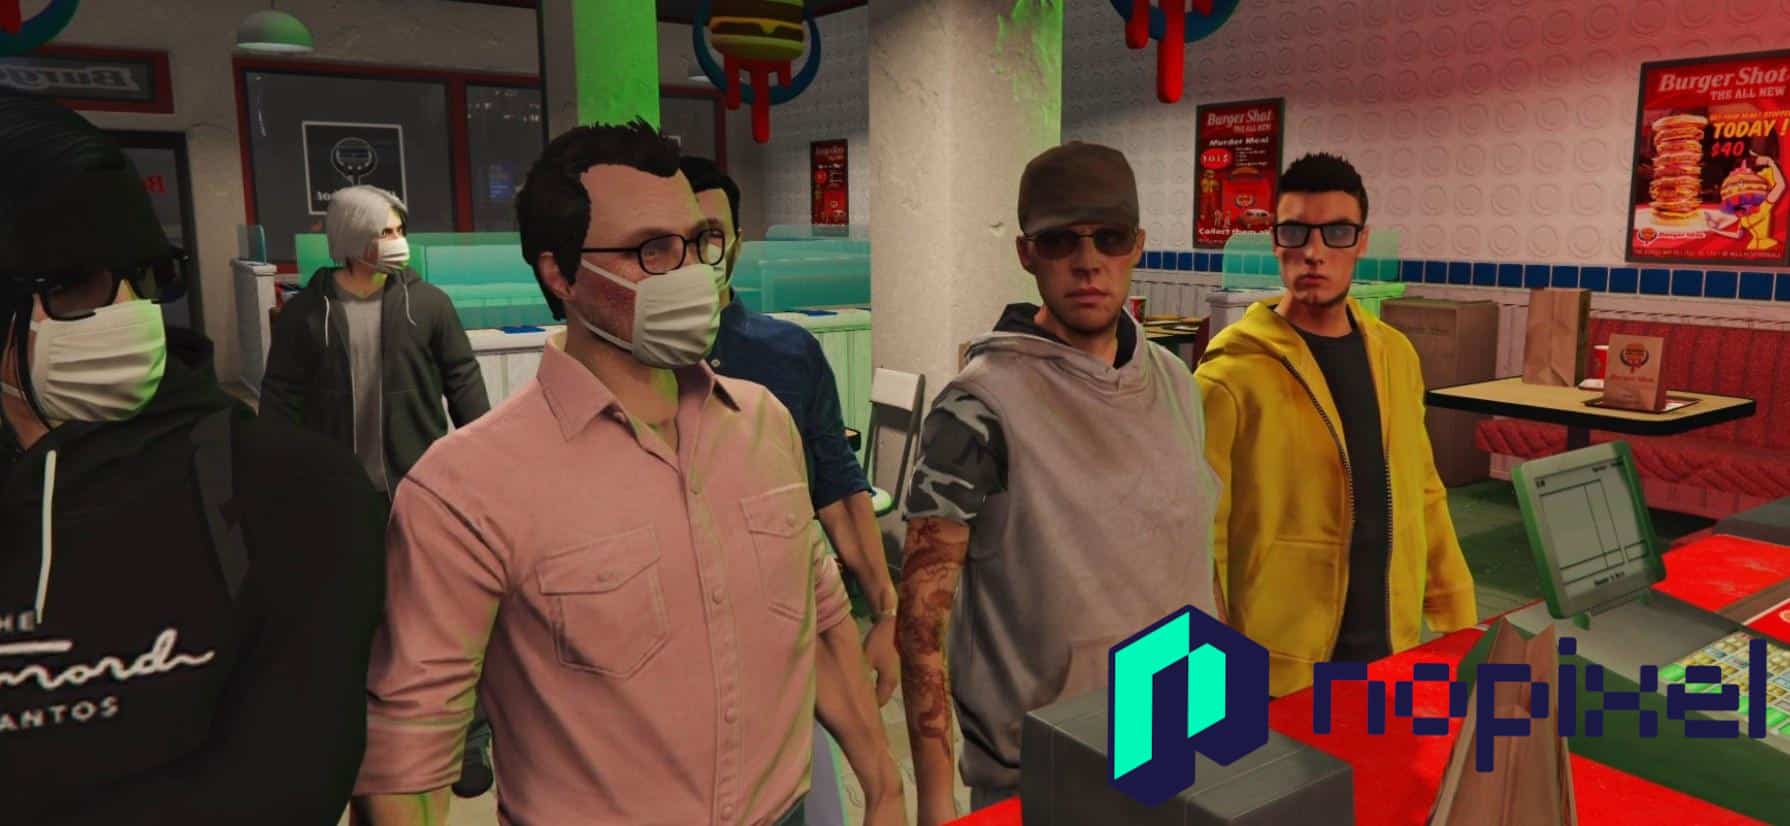 GTA RP roleplayers play as themselves